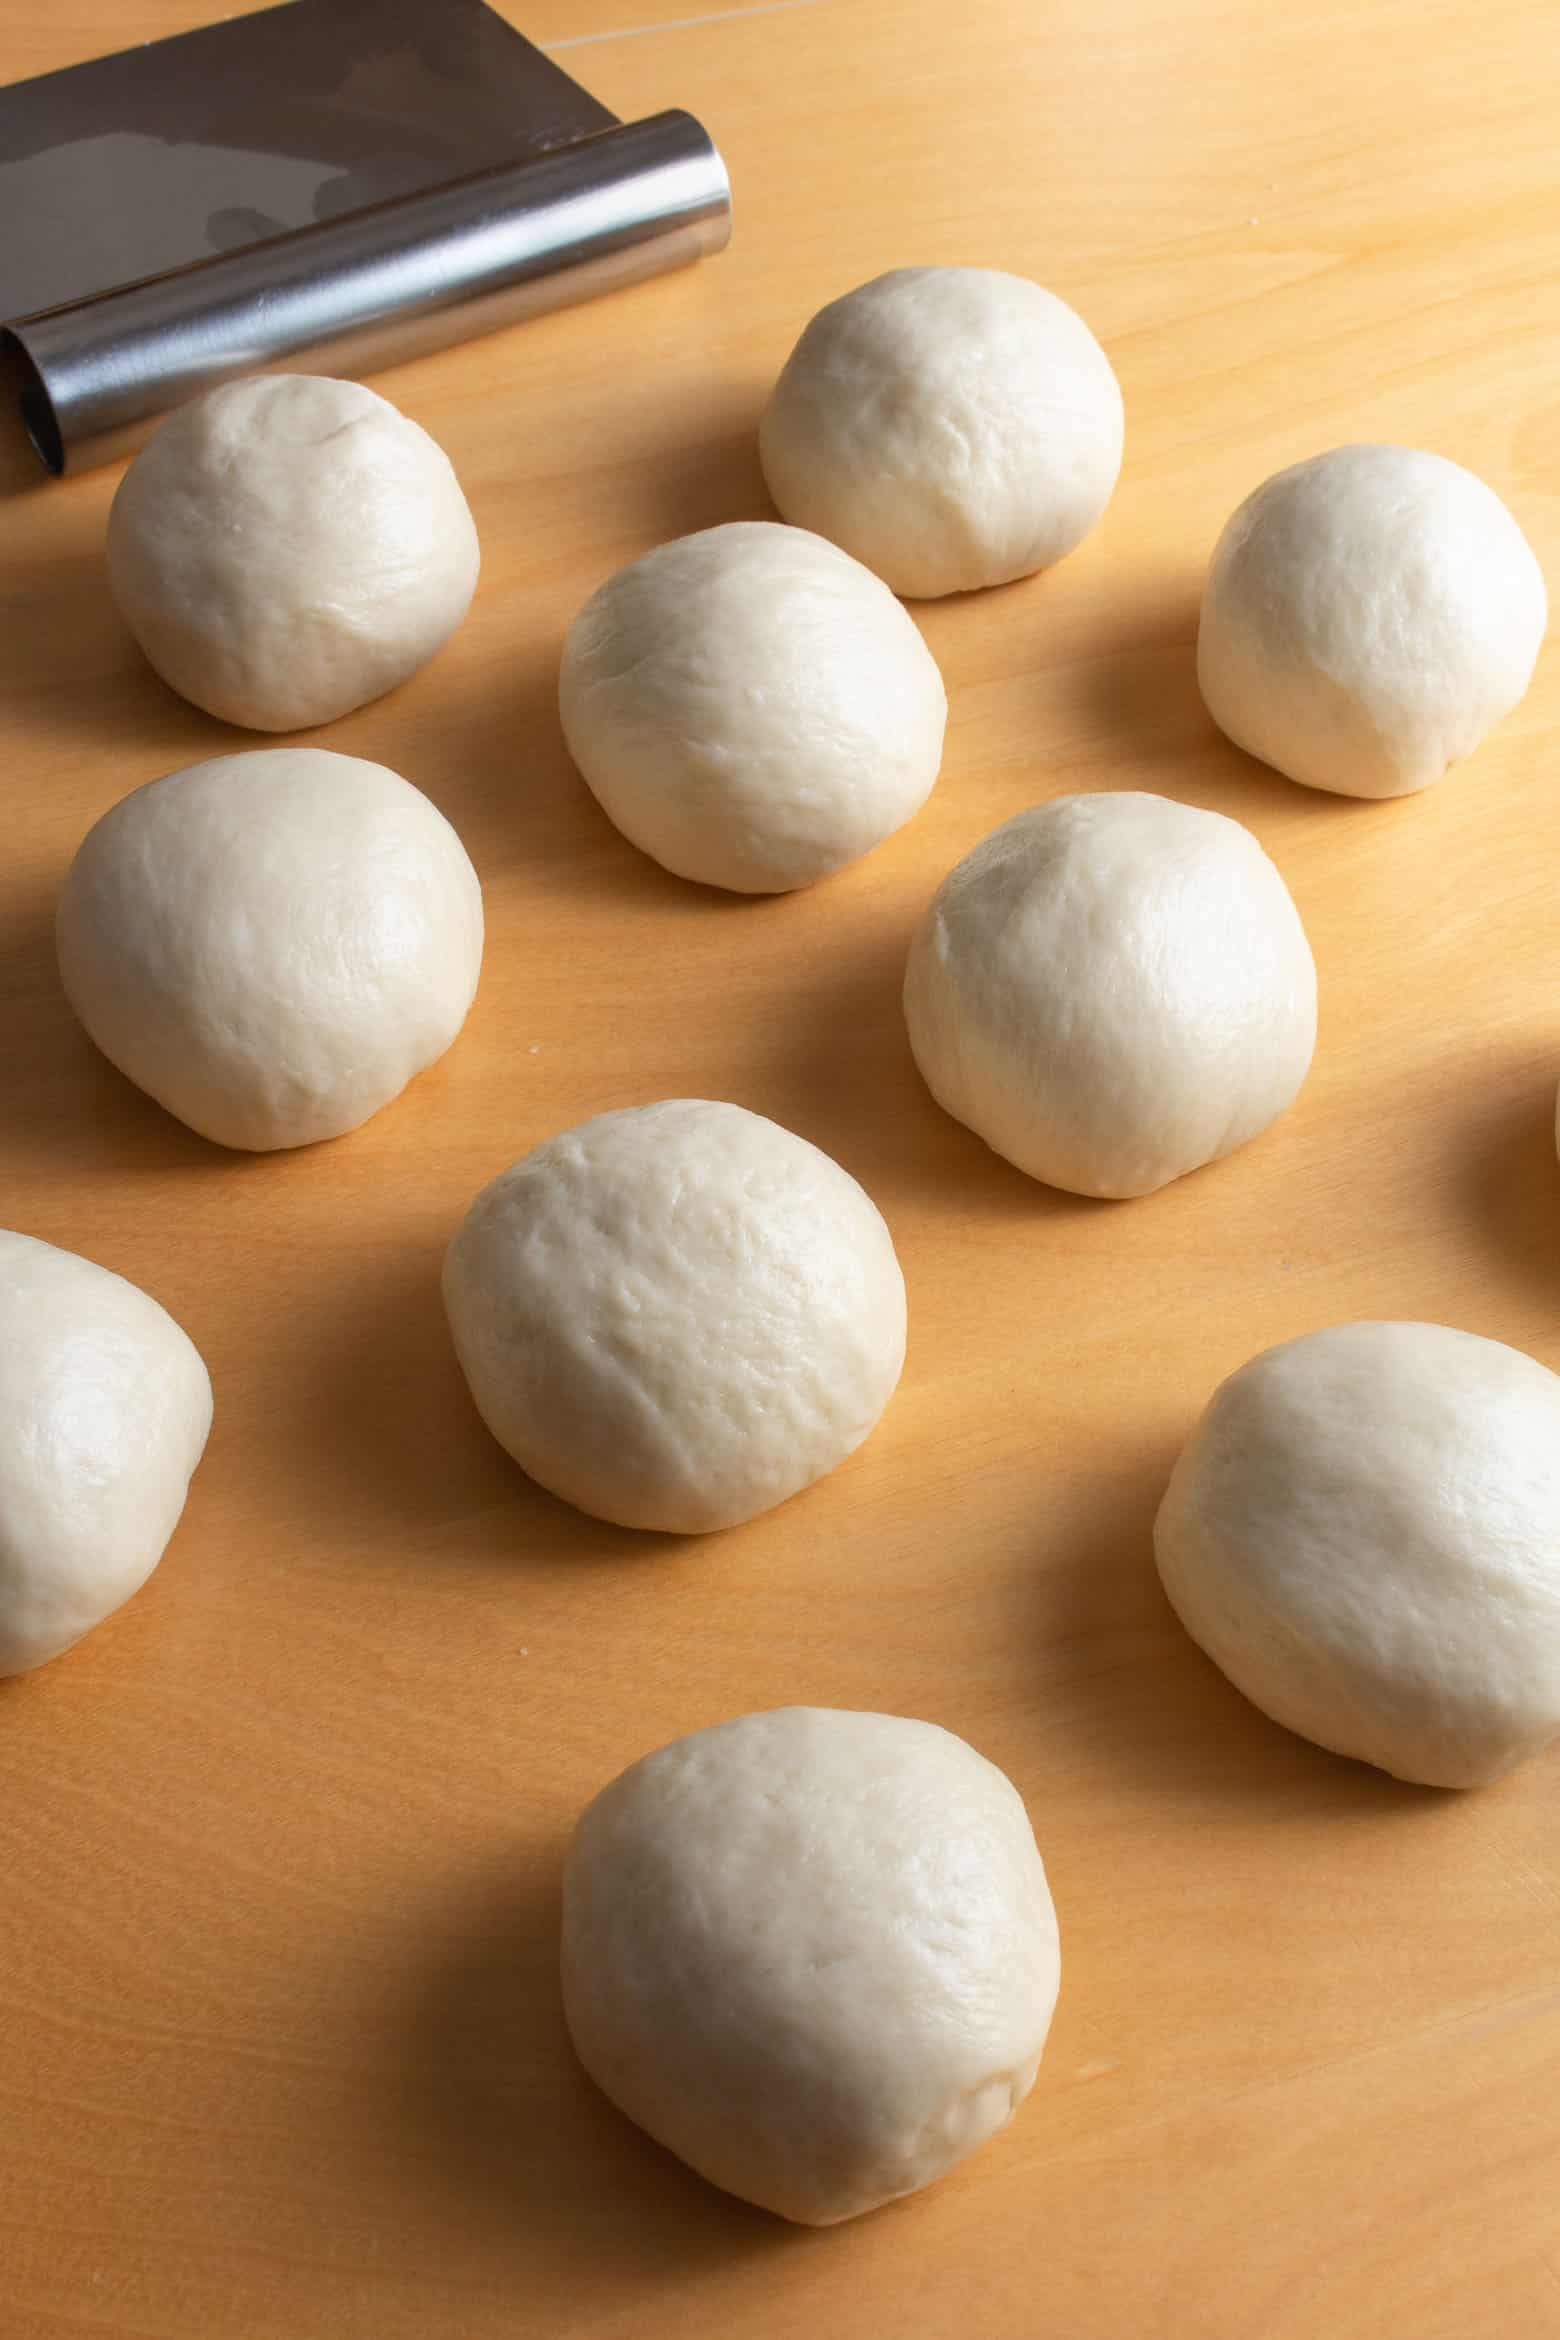 Balls of bread dough on a wooden table.